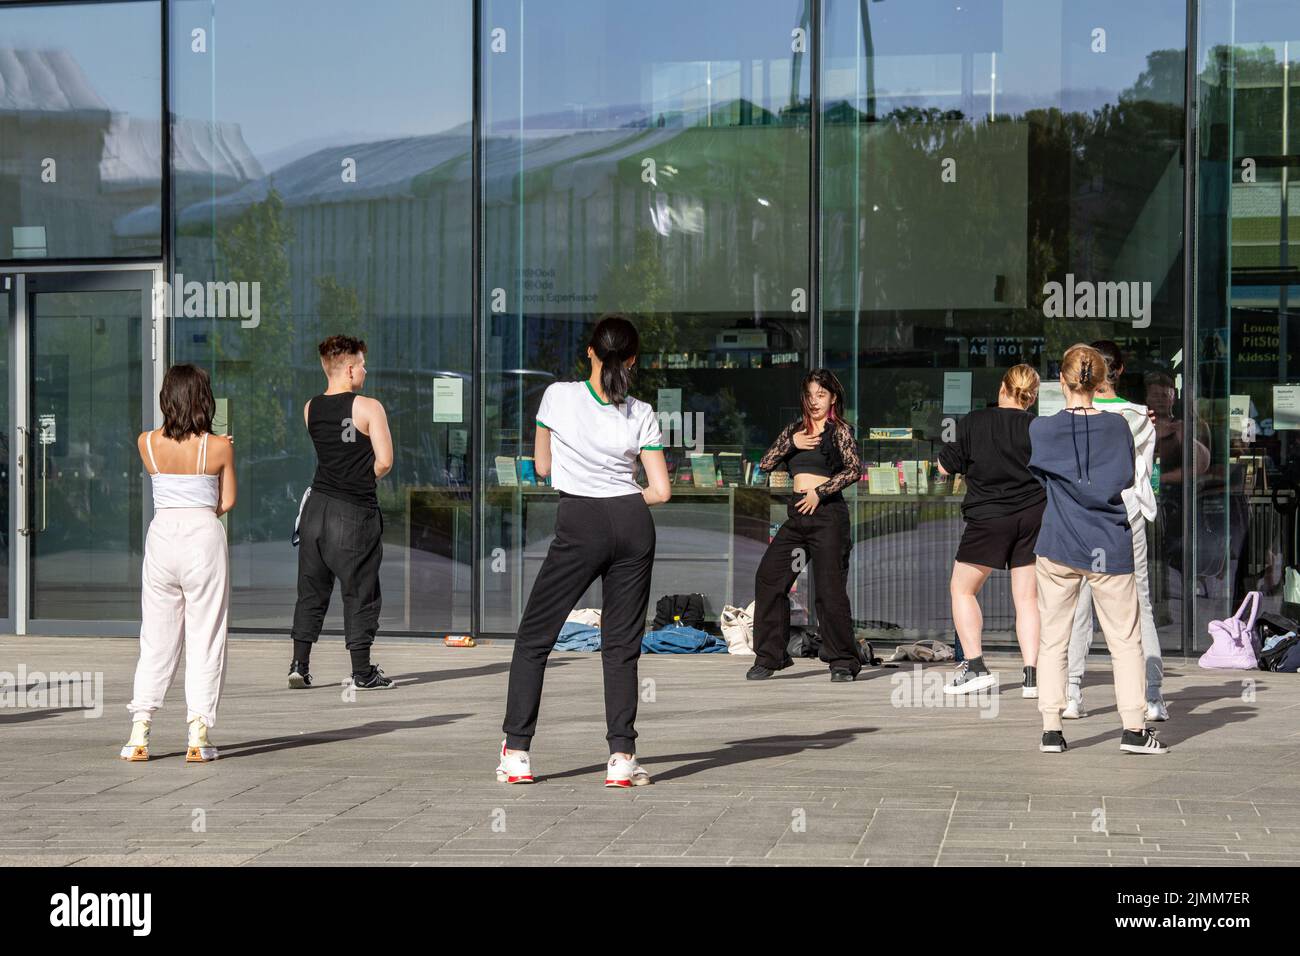 Young adults or teenagers practising dance moves in front of Oodi library in Helsinki, Finland Stock Photo